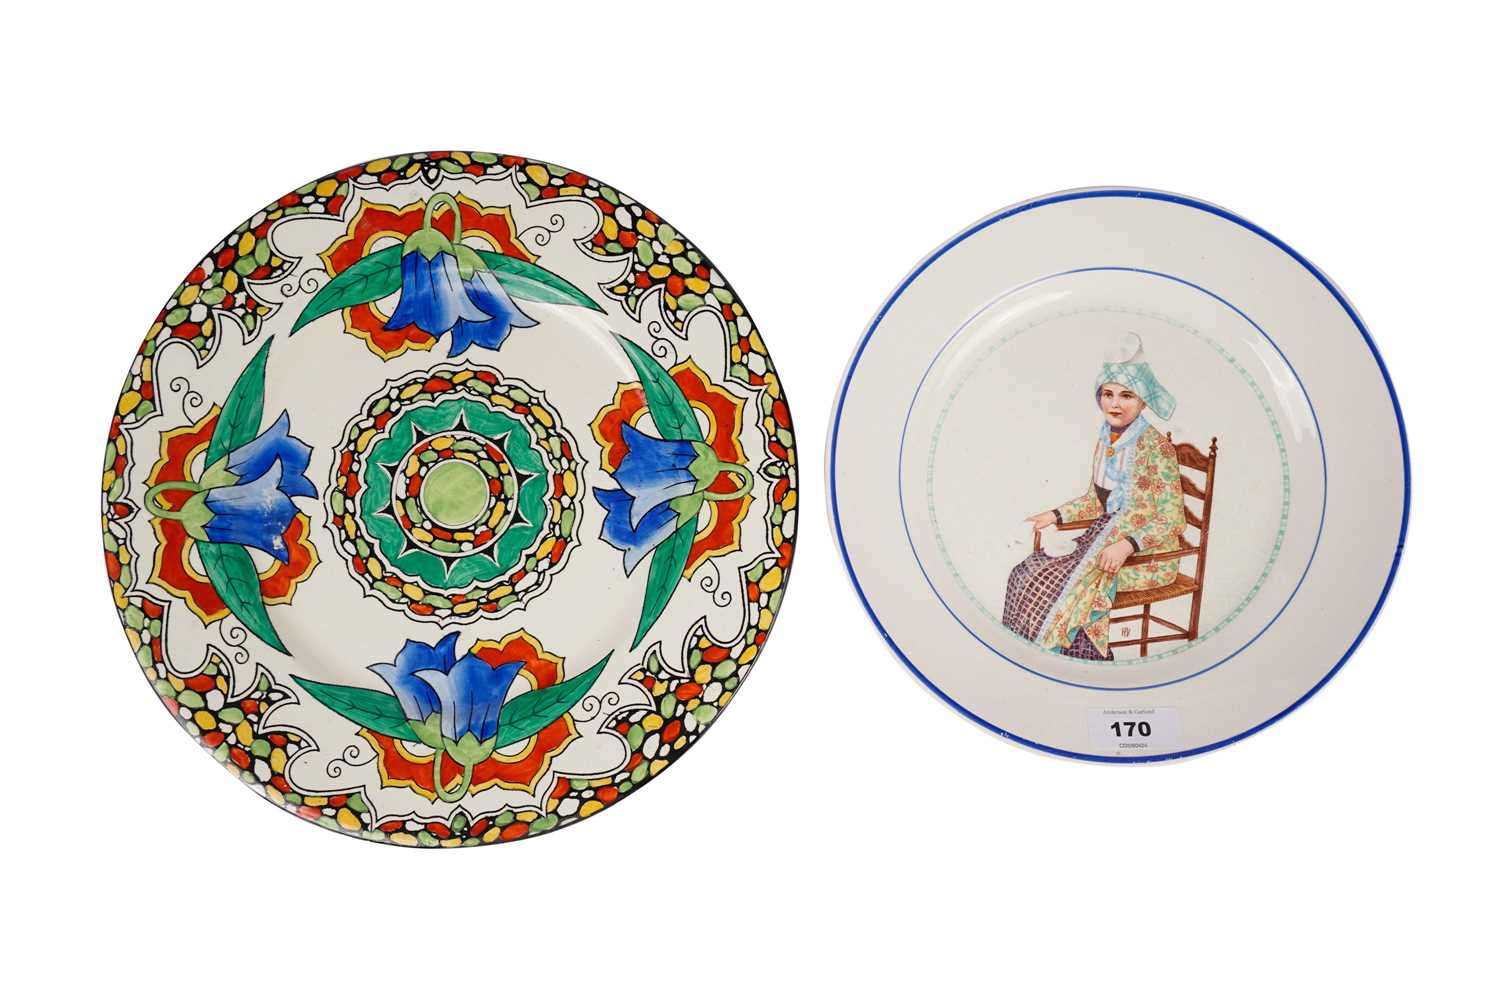 A Maling ‘Bluebell’ pattern plate and an early 20th Century Dutch ceramic plate